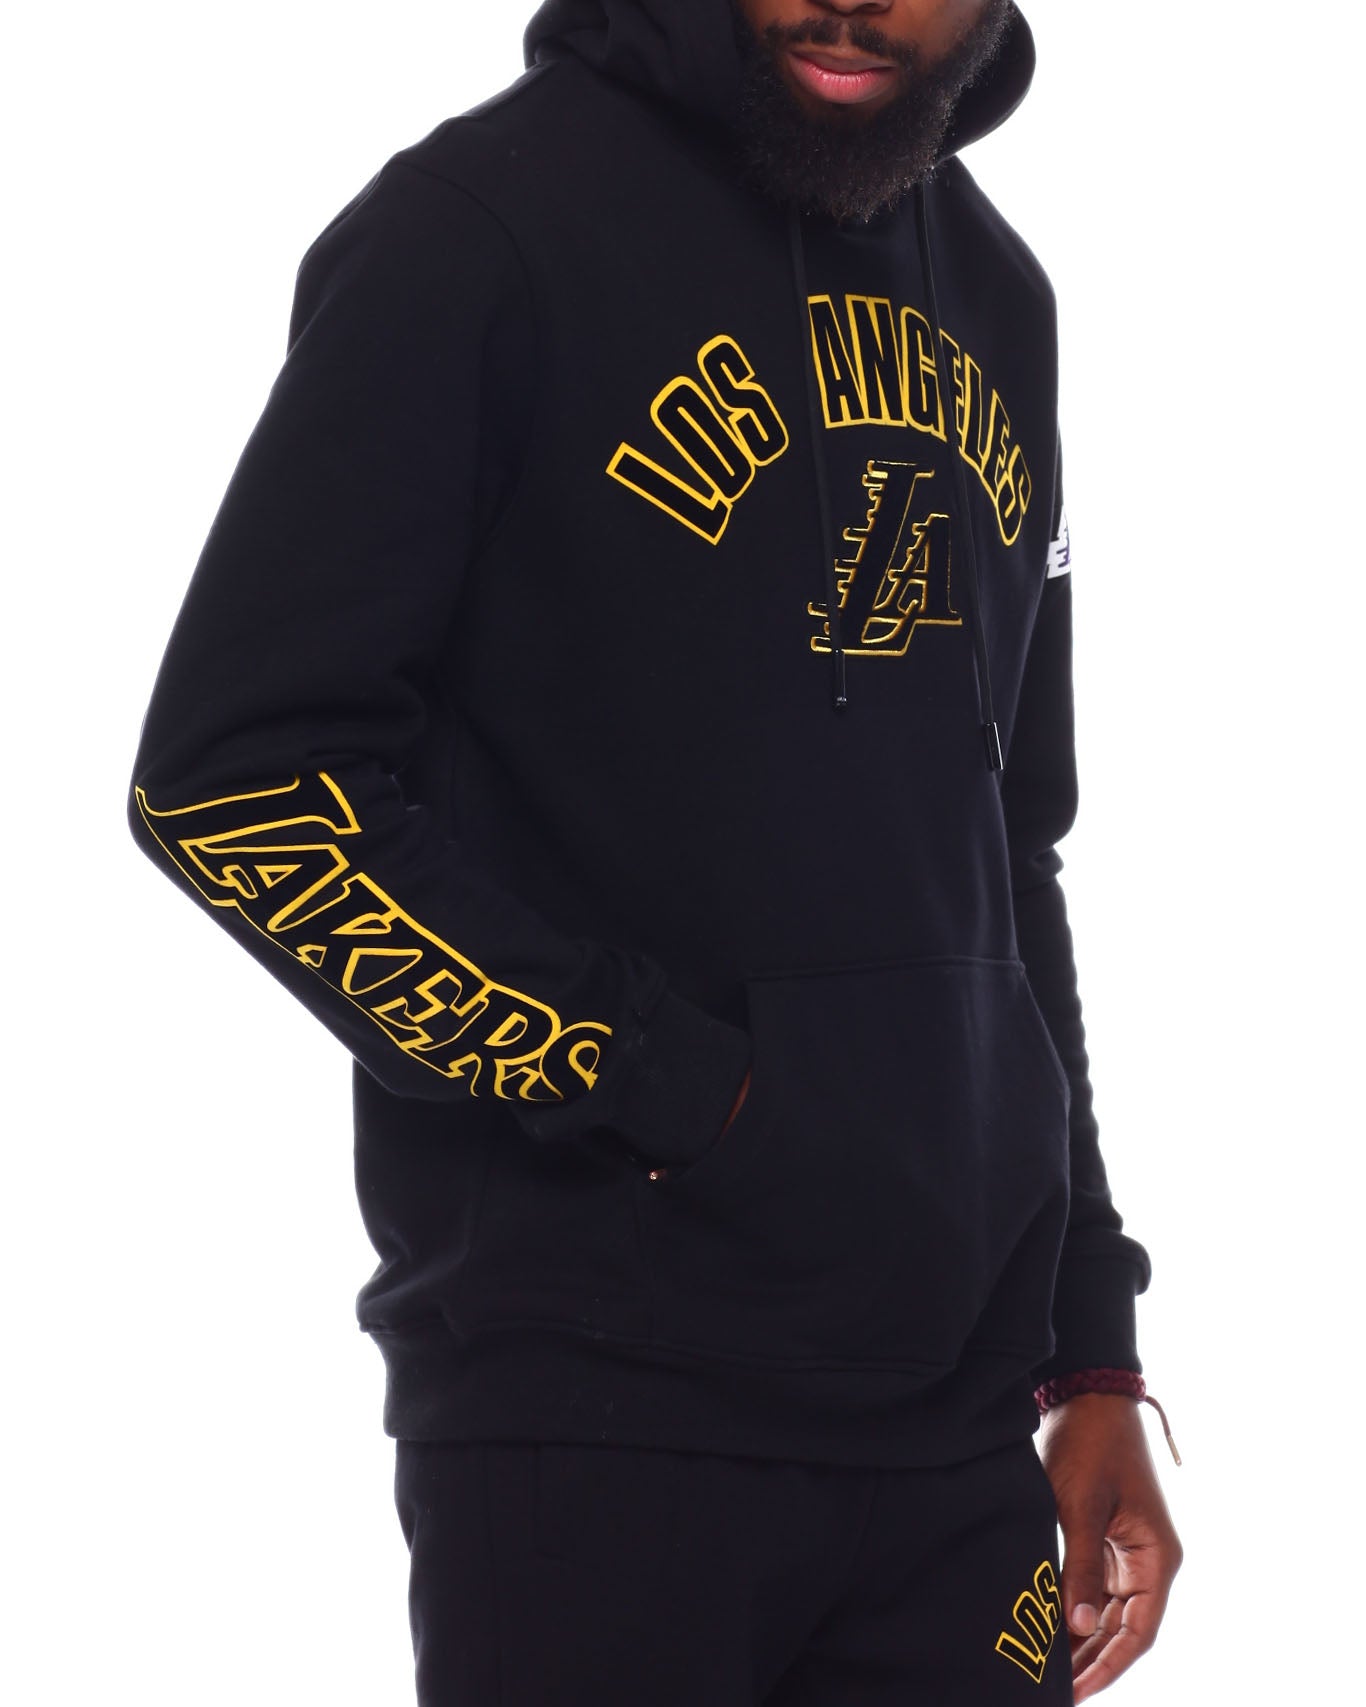 Los Angeles Lakers NBA Express Twill Logo Hoodie - Gold by Bulletin - Cotton/Polyester Blend - Size 4XL - SportBuff